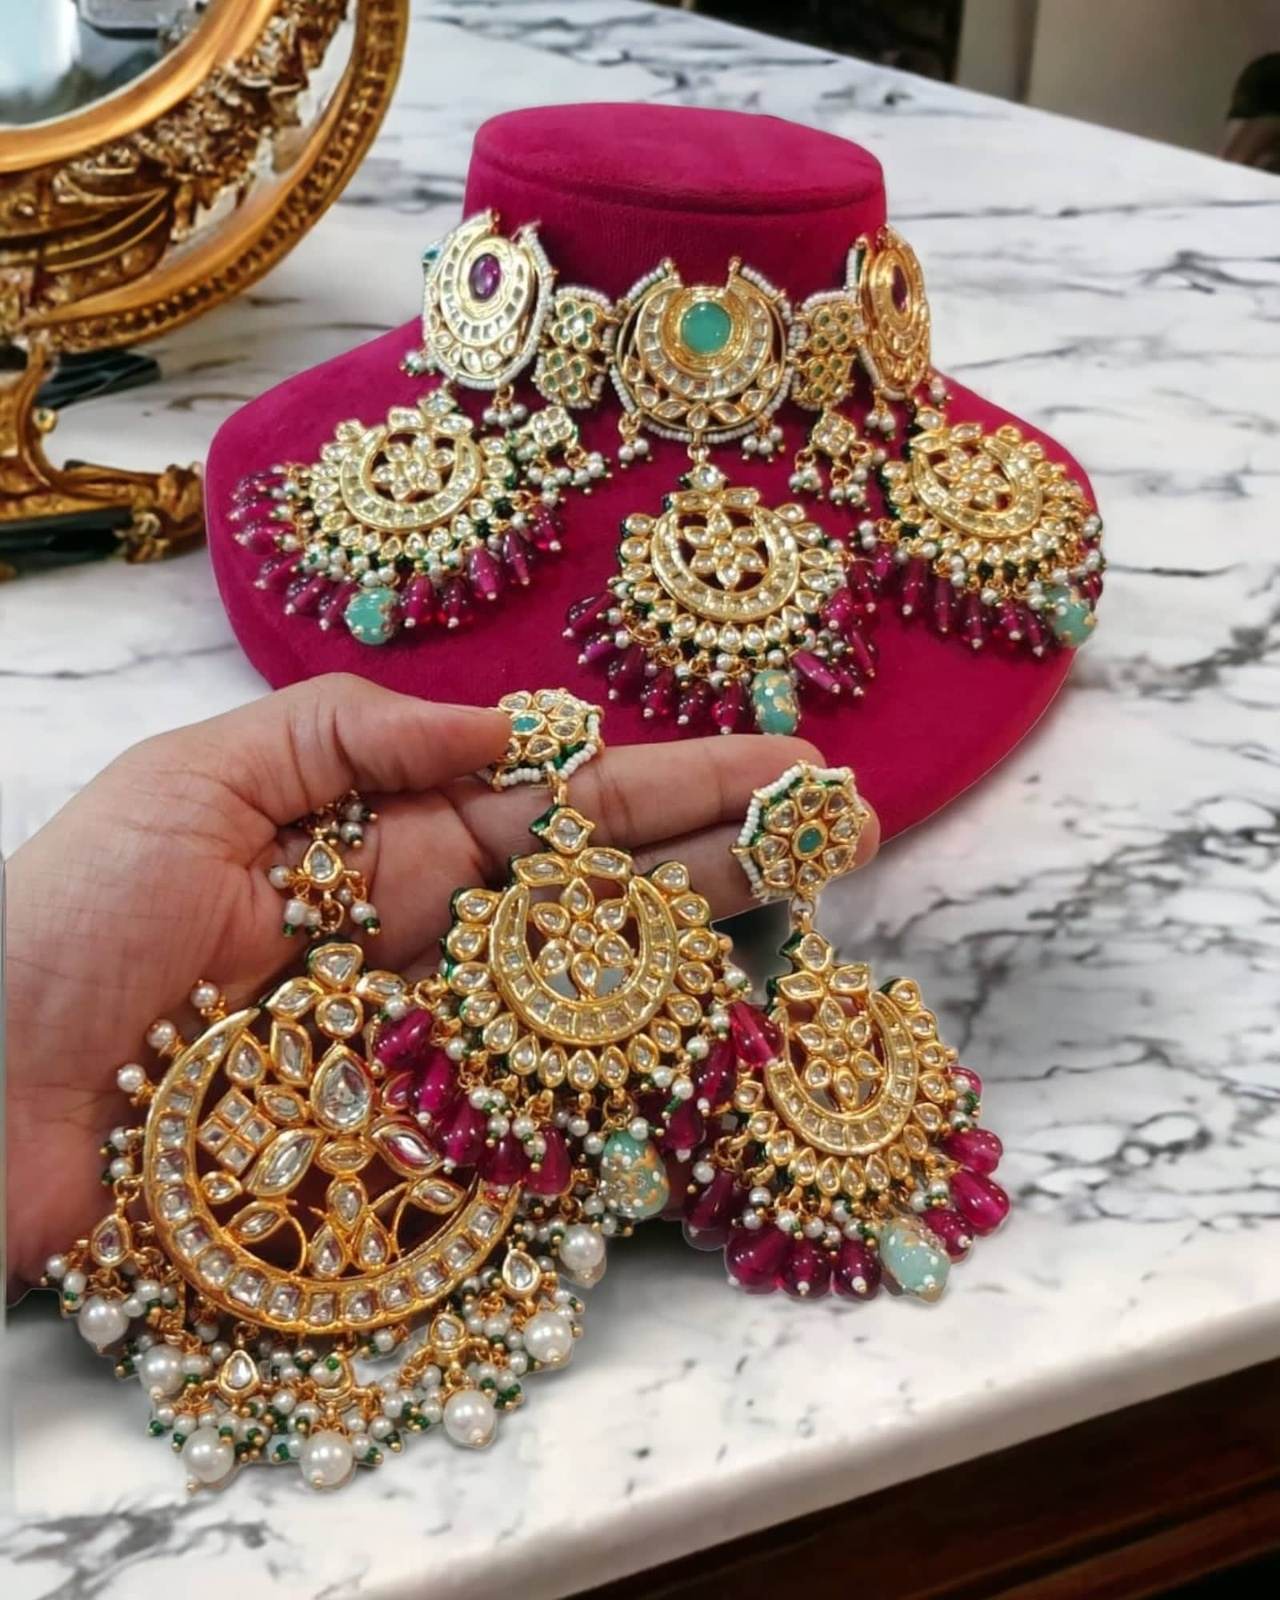 Ratna kundan necklace set with oversized tikka and chand bali style earrings in ruby color